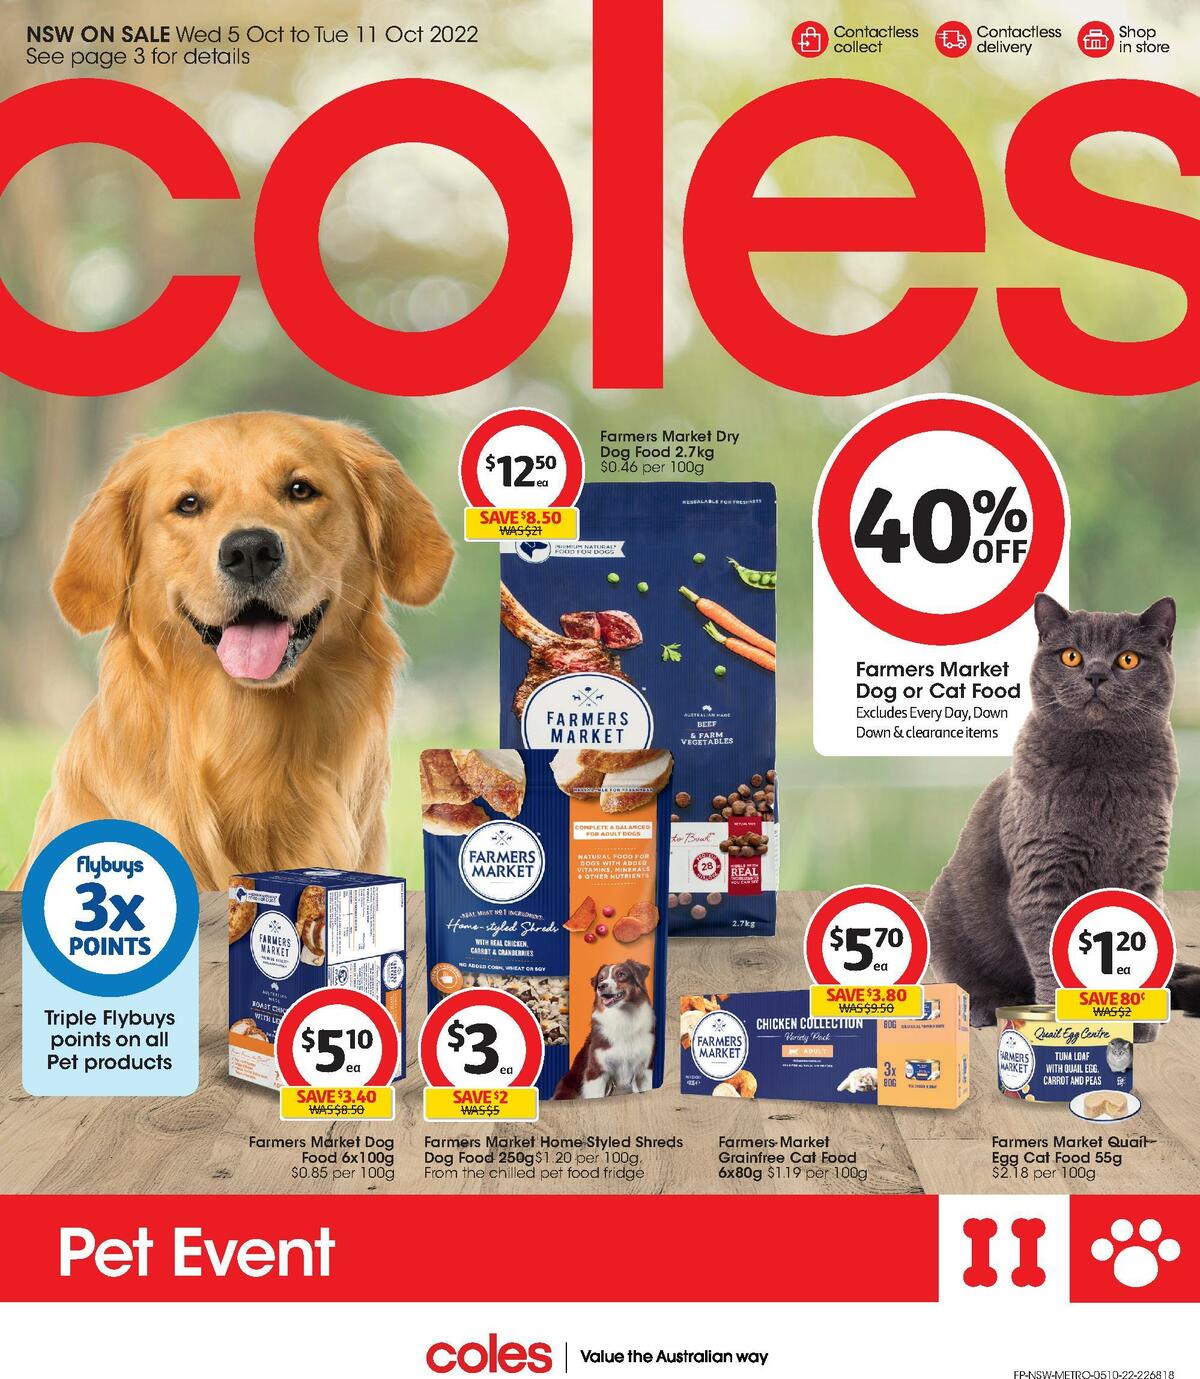 Coles Pet Event Catalogues from 5 October